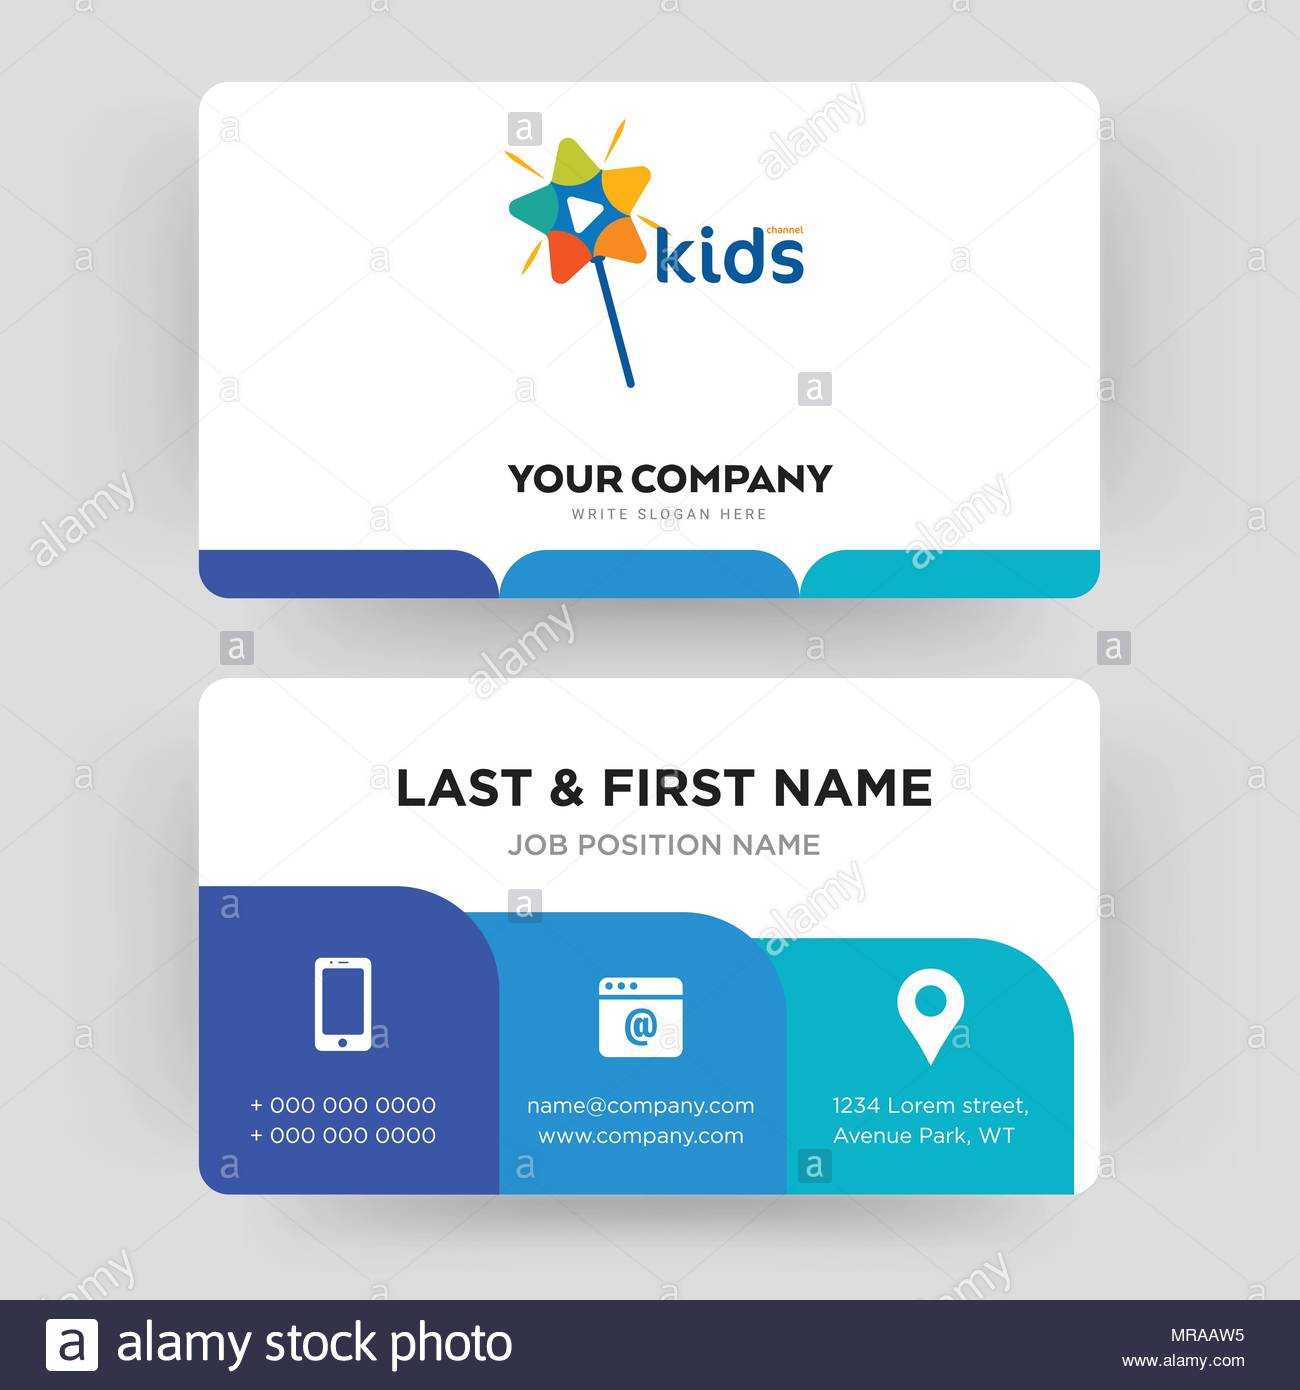 Kids Channel, Business Card Design Template, Visiting For Intended For Id Card Template For Kids